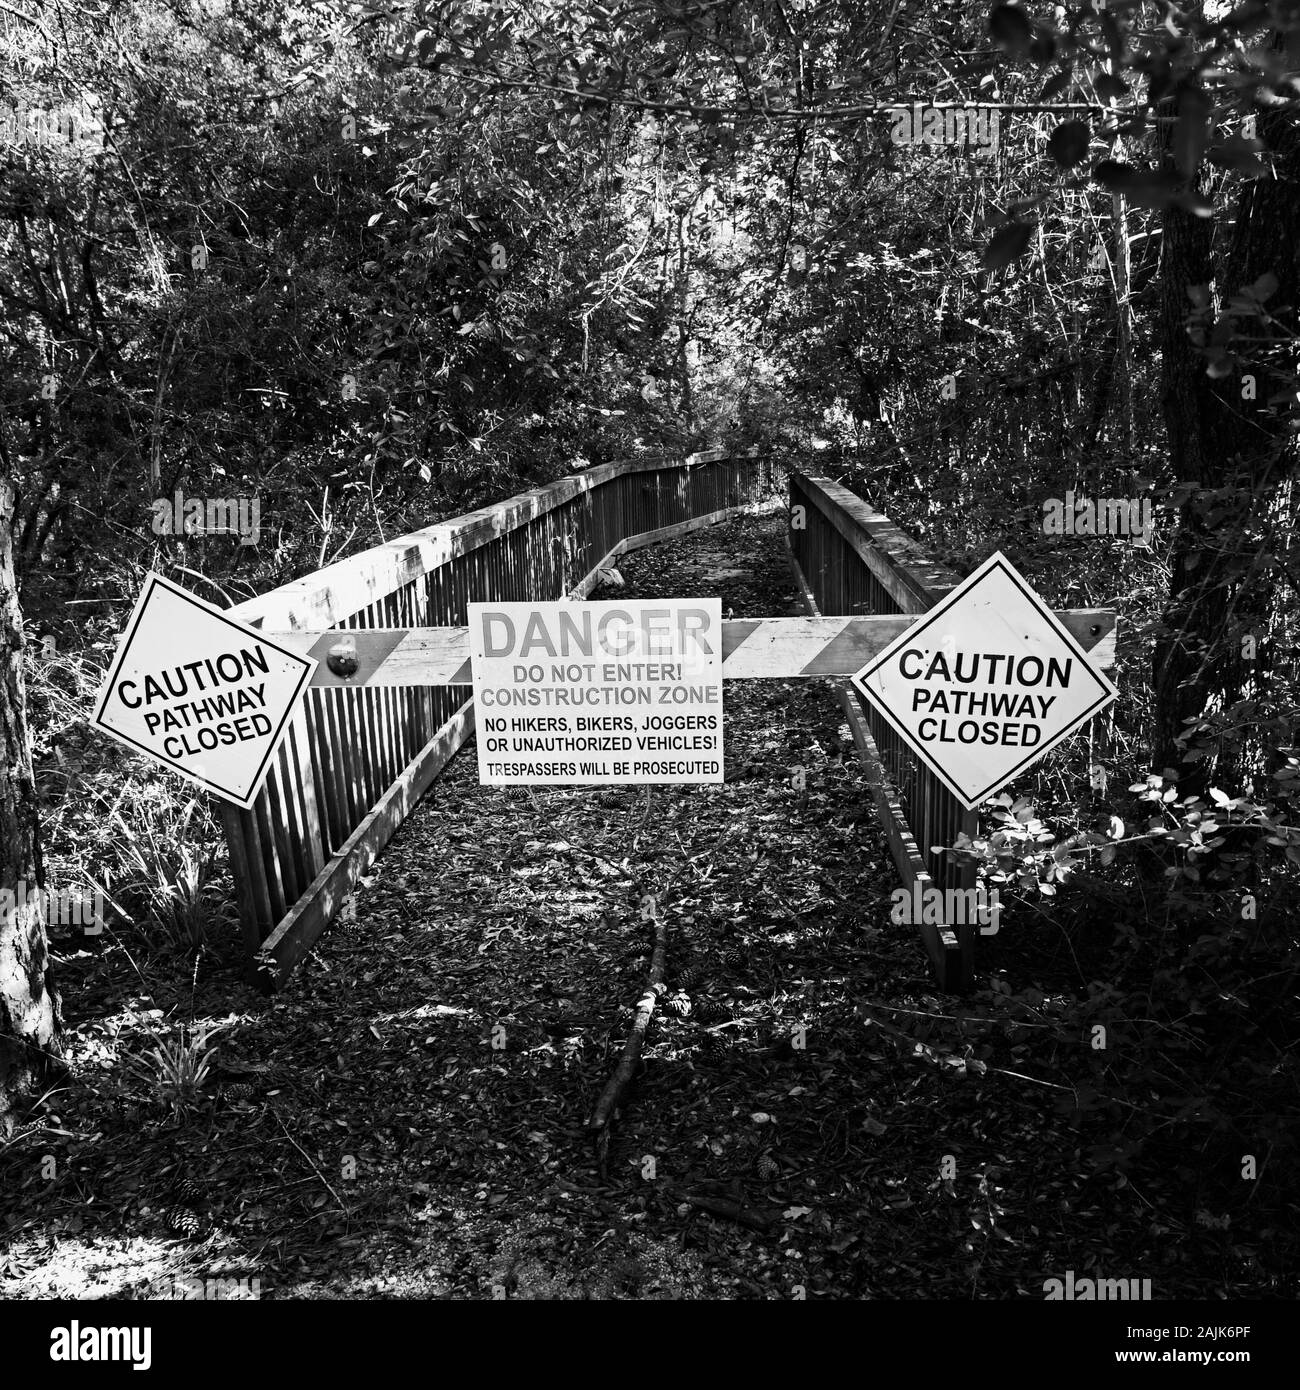 Spring TX USA - 10/10/2019  -  Wooden Bridge Closed Danger Sign 2 in B&W Stock Photo